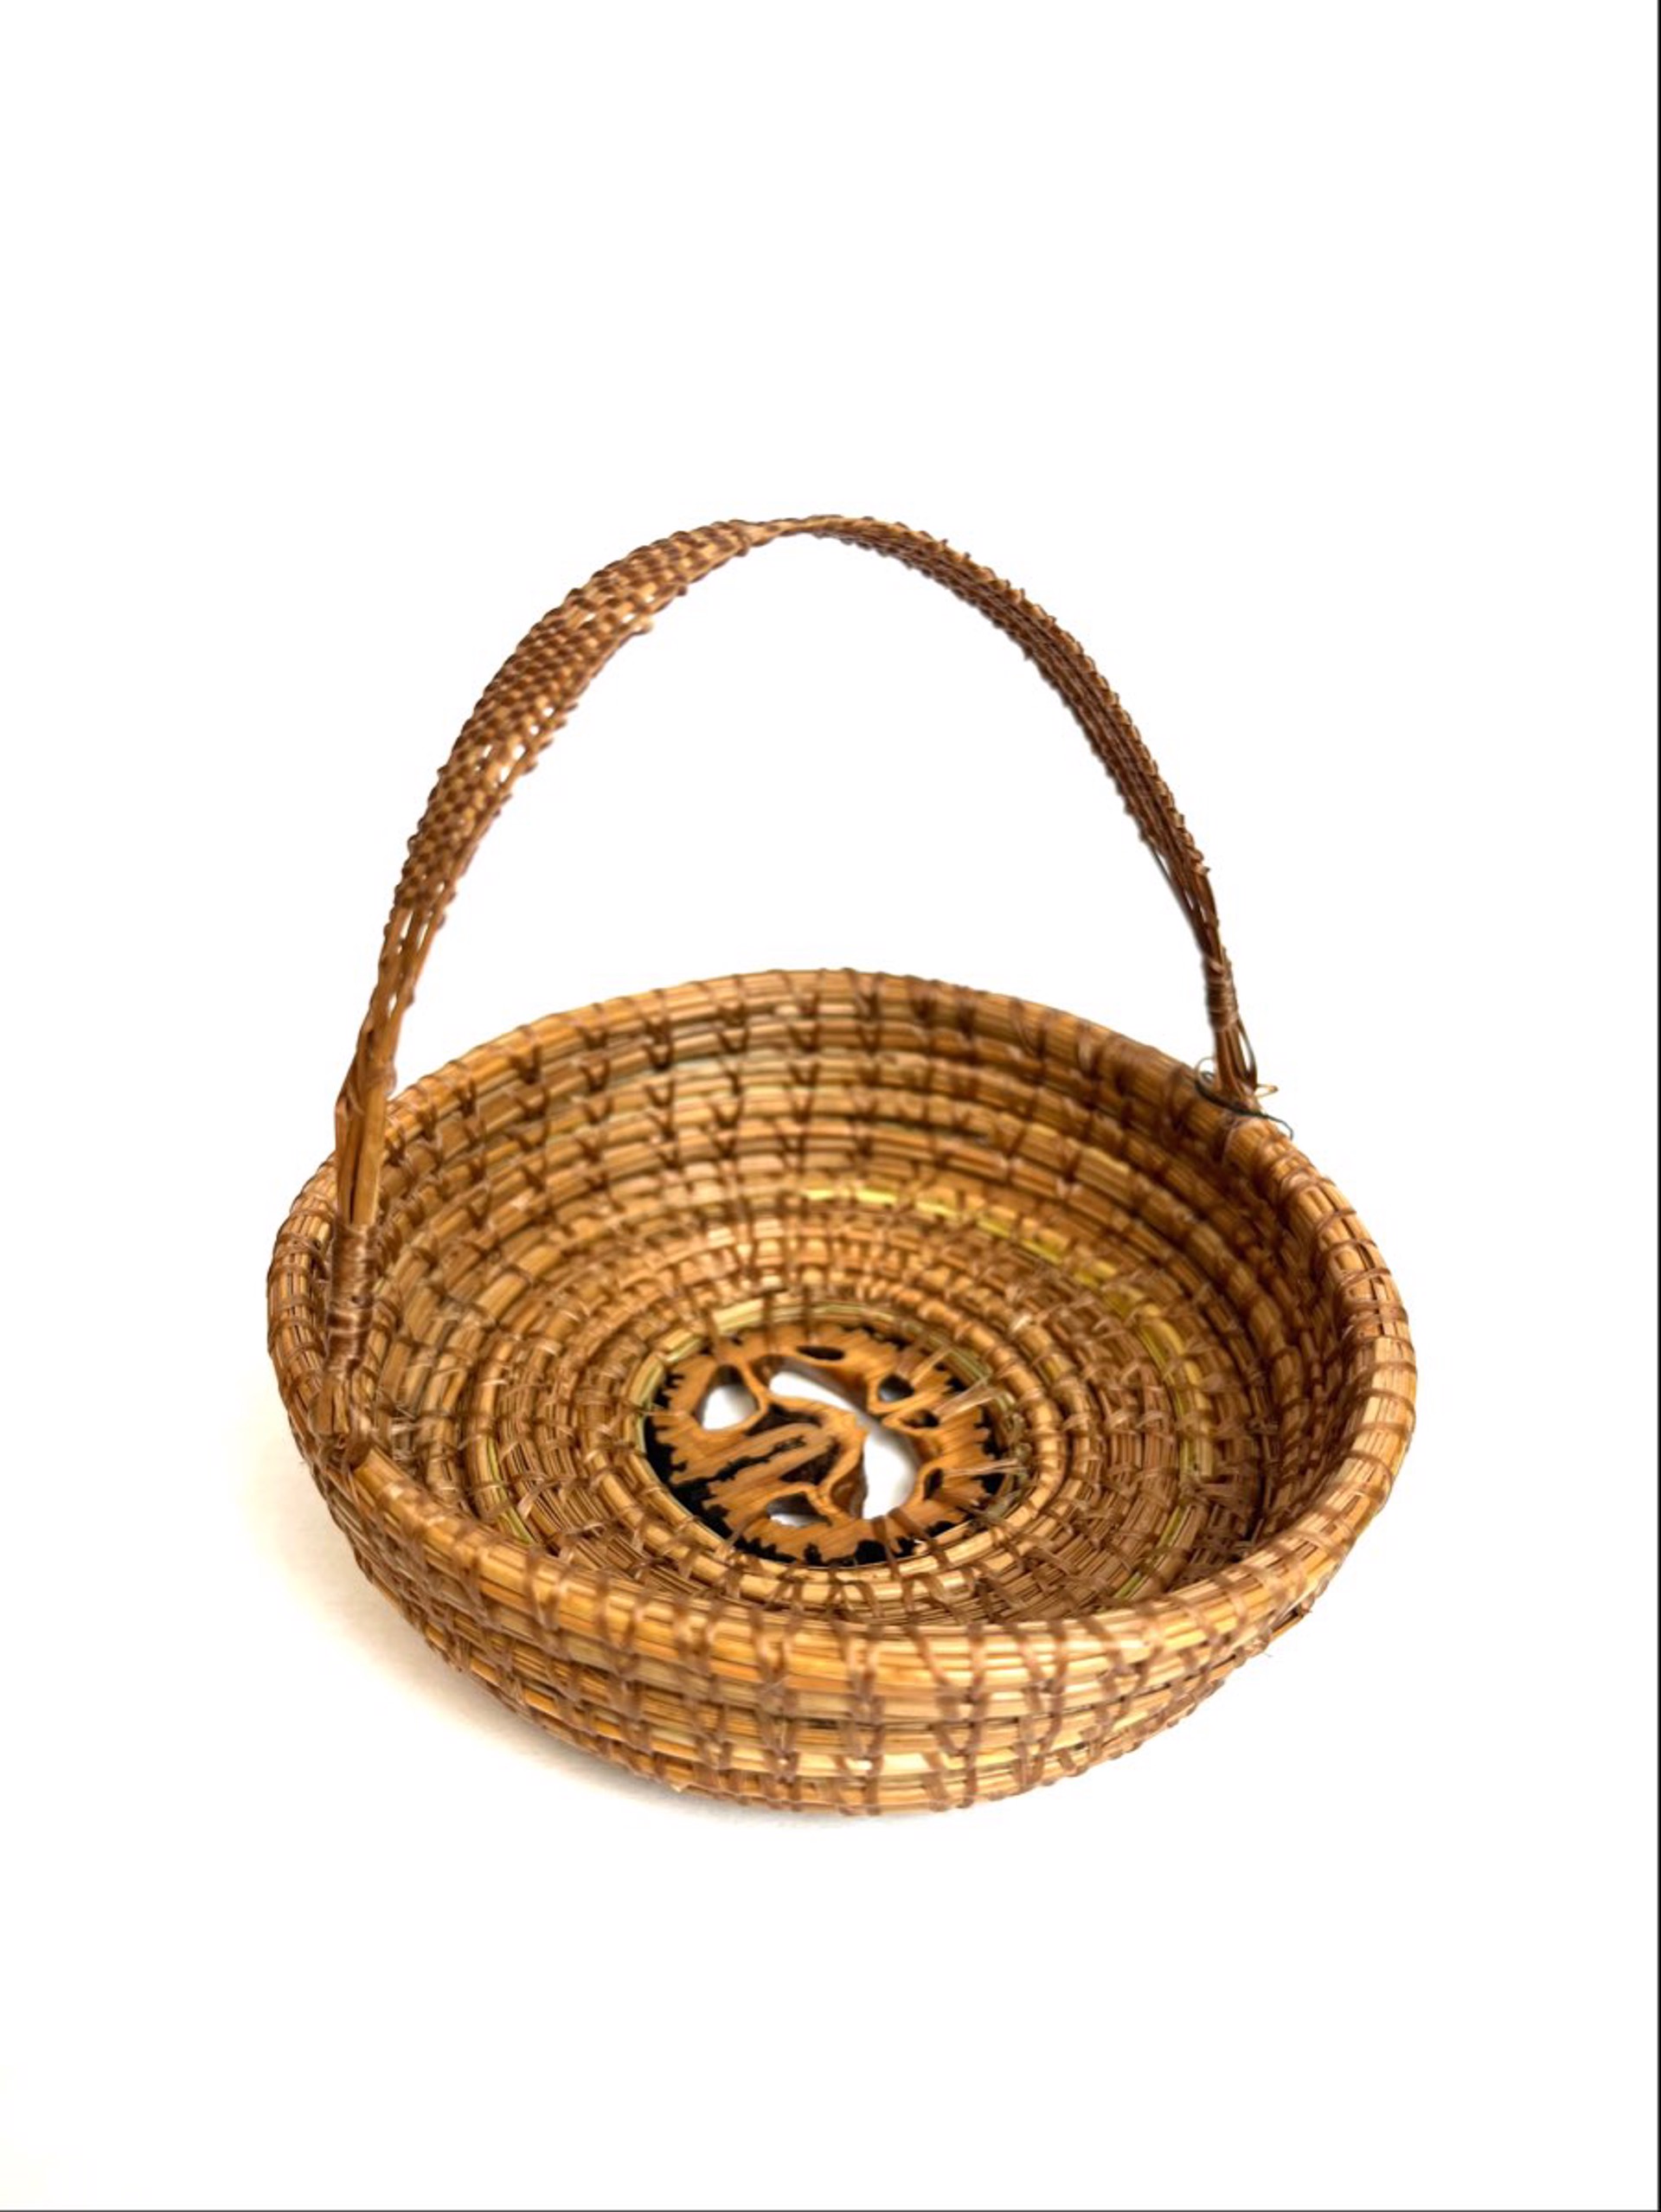 Basket with Walnut Center and Swing Woven Handle by Jacqueline Green